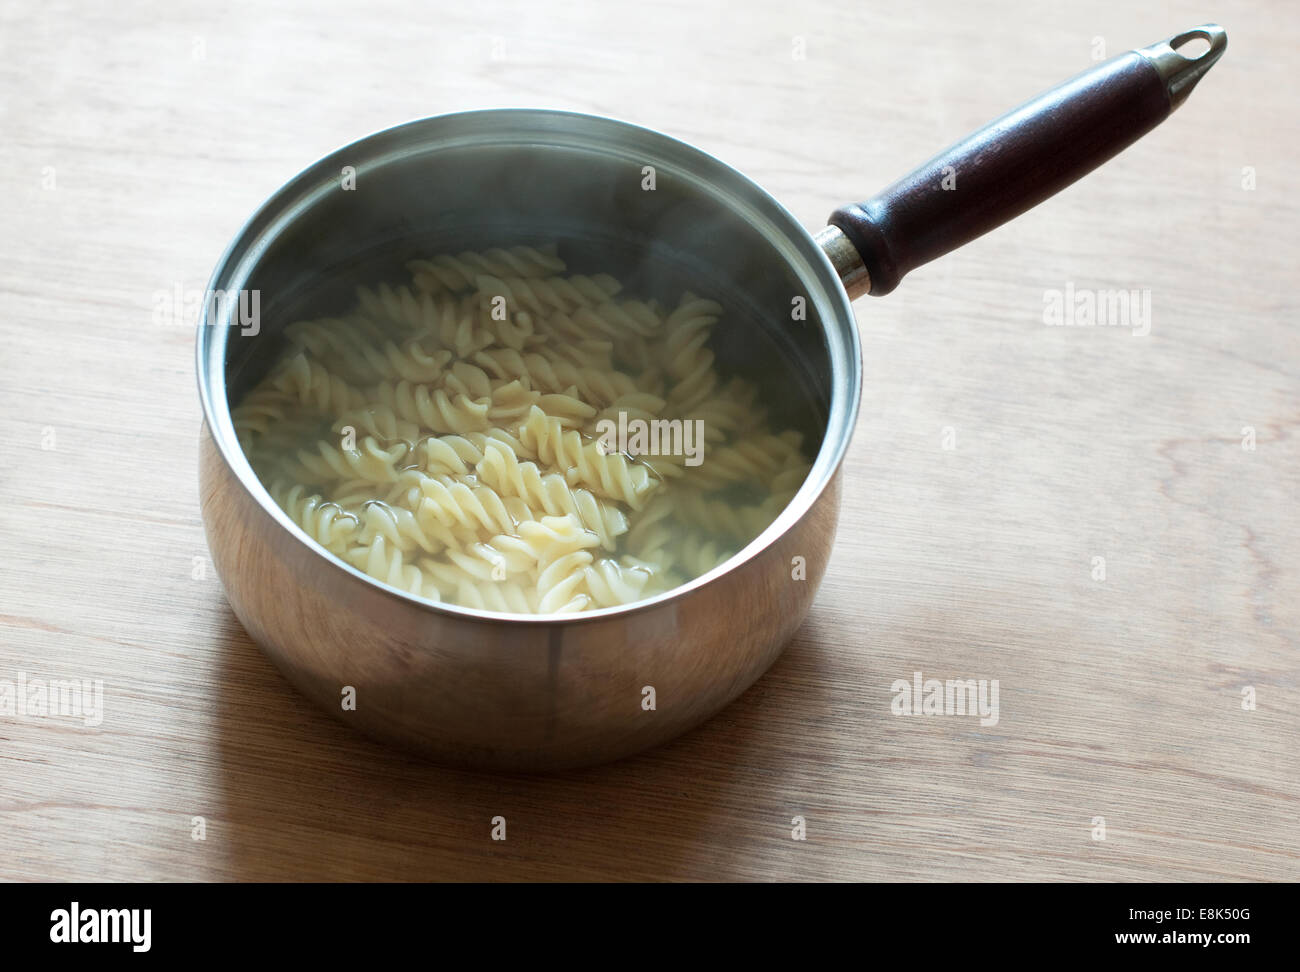 Still life food image of  cooked pasta in a stainless steel saucepan Stock Photo